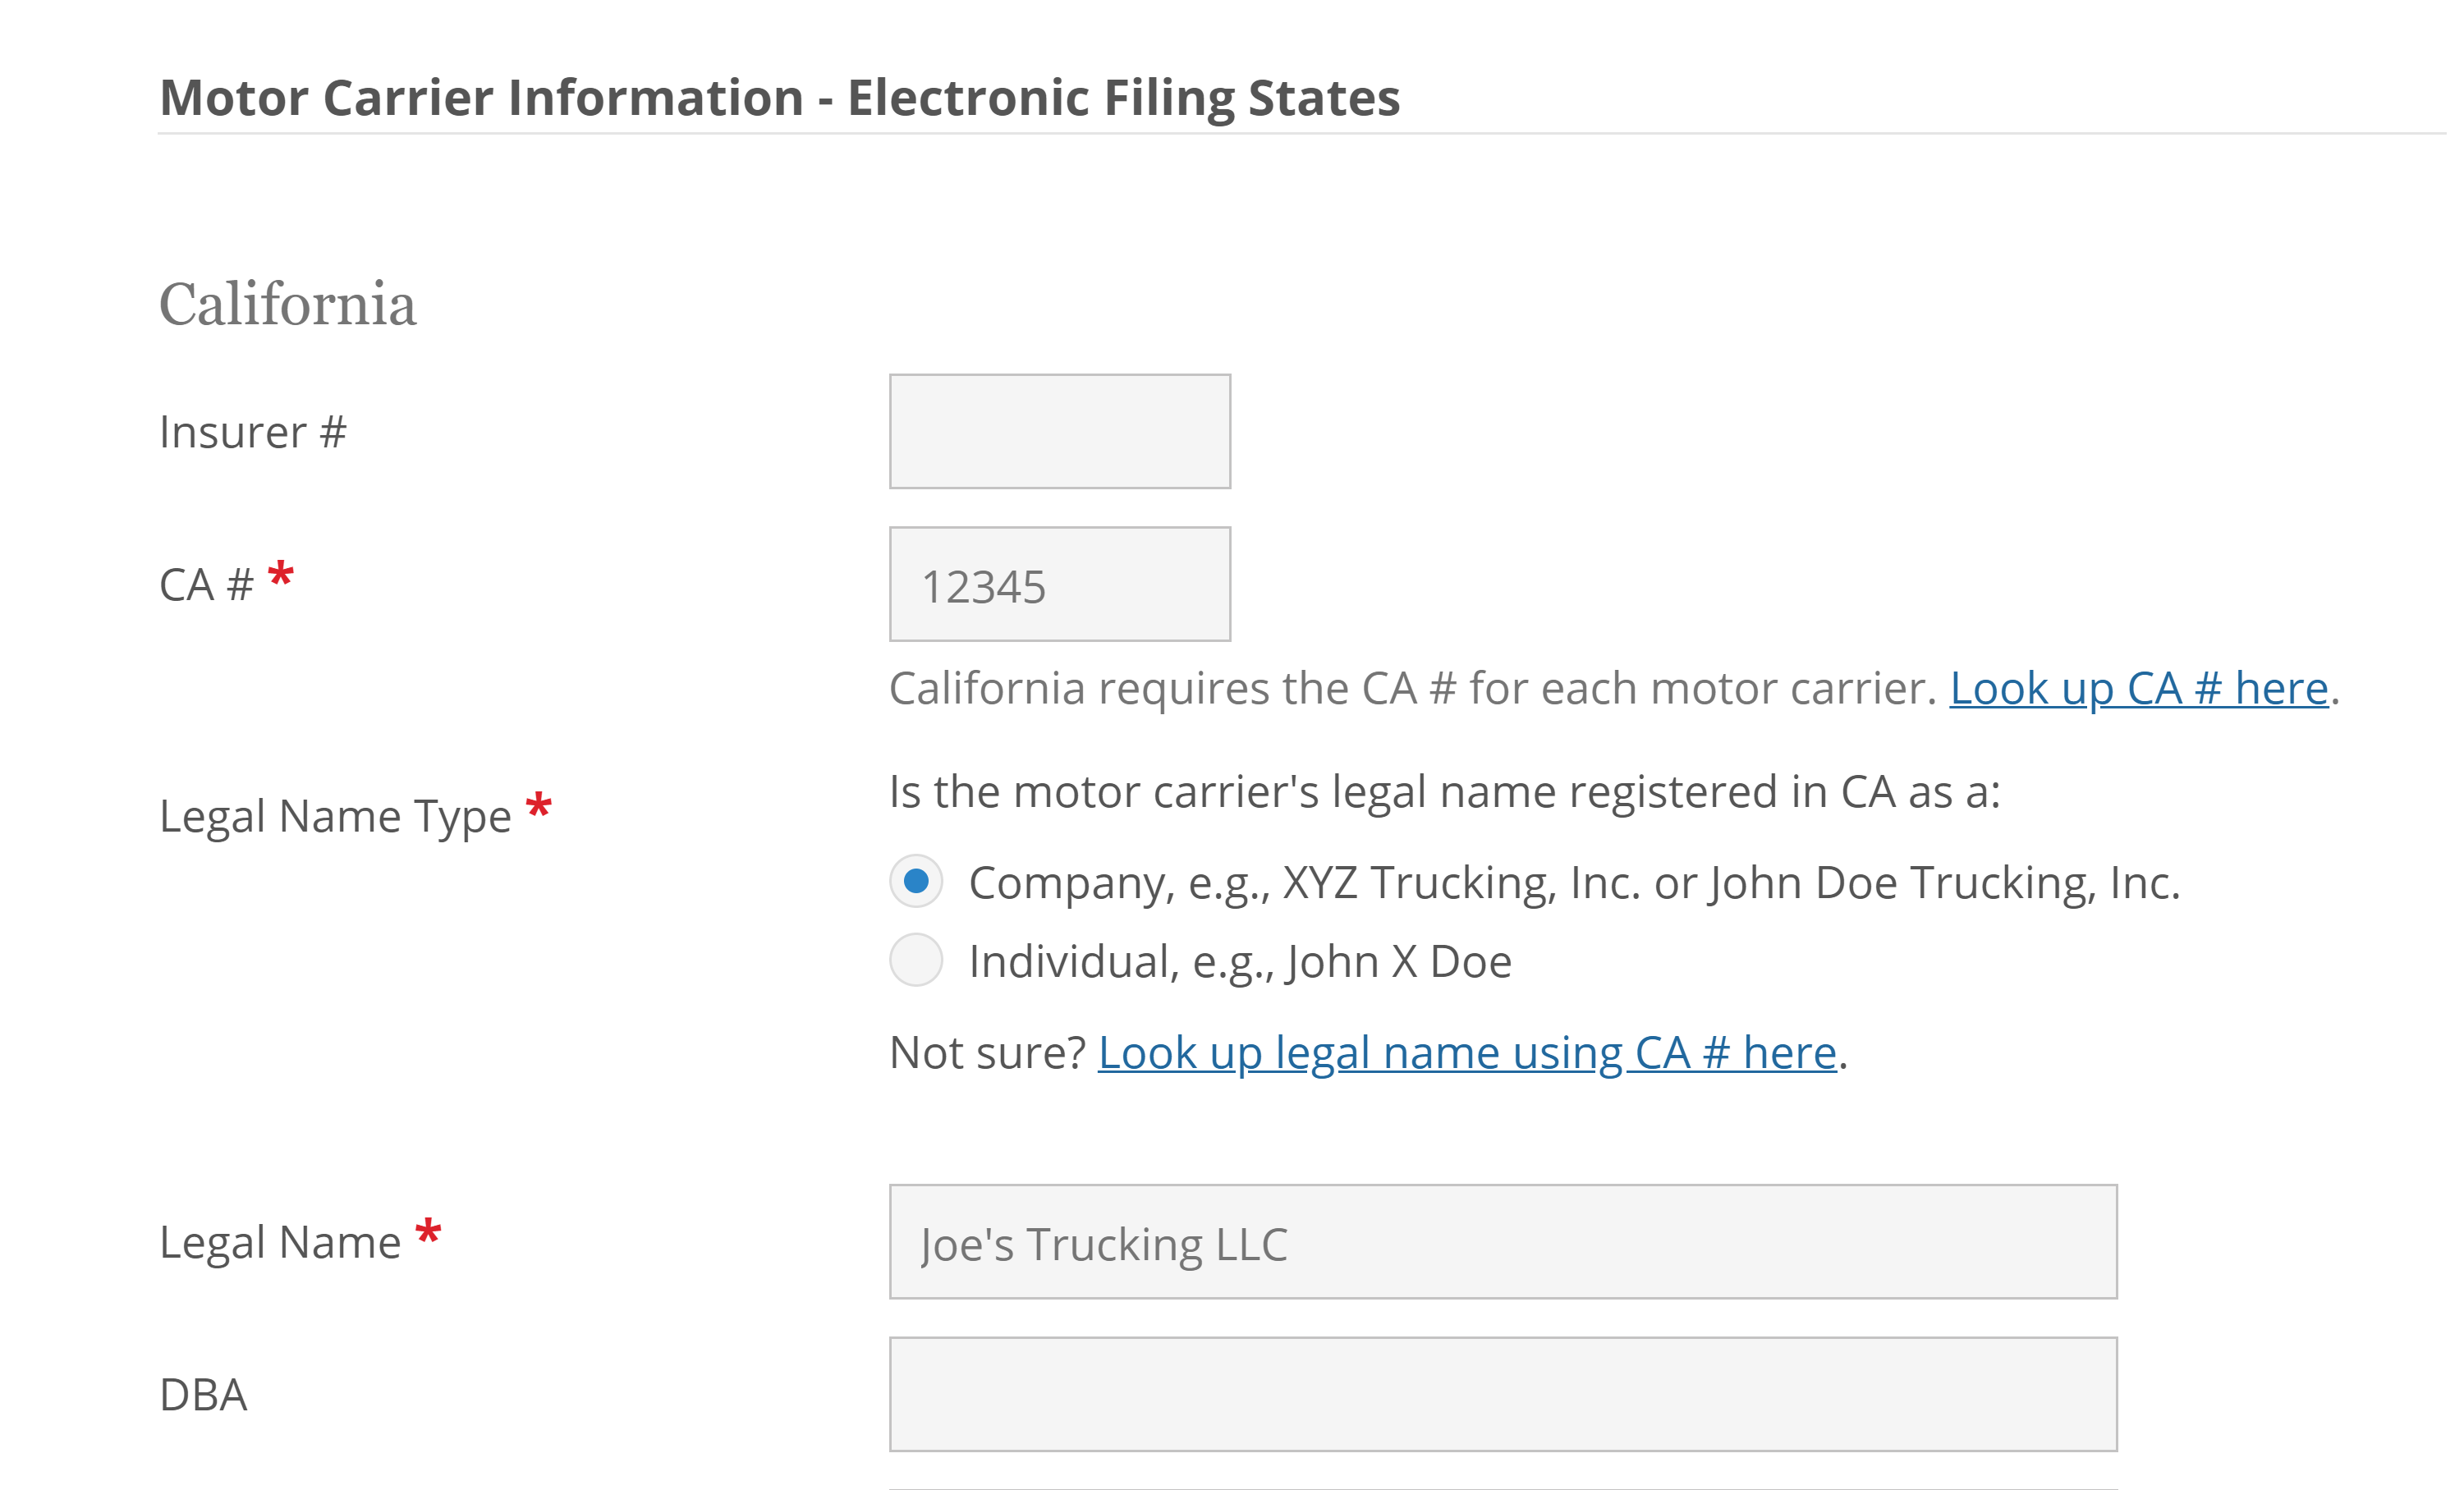 Screenshot of interface for California Motor Carrier Information and new company legal name.